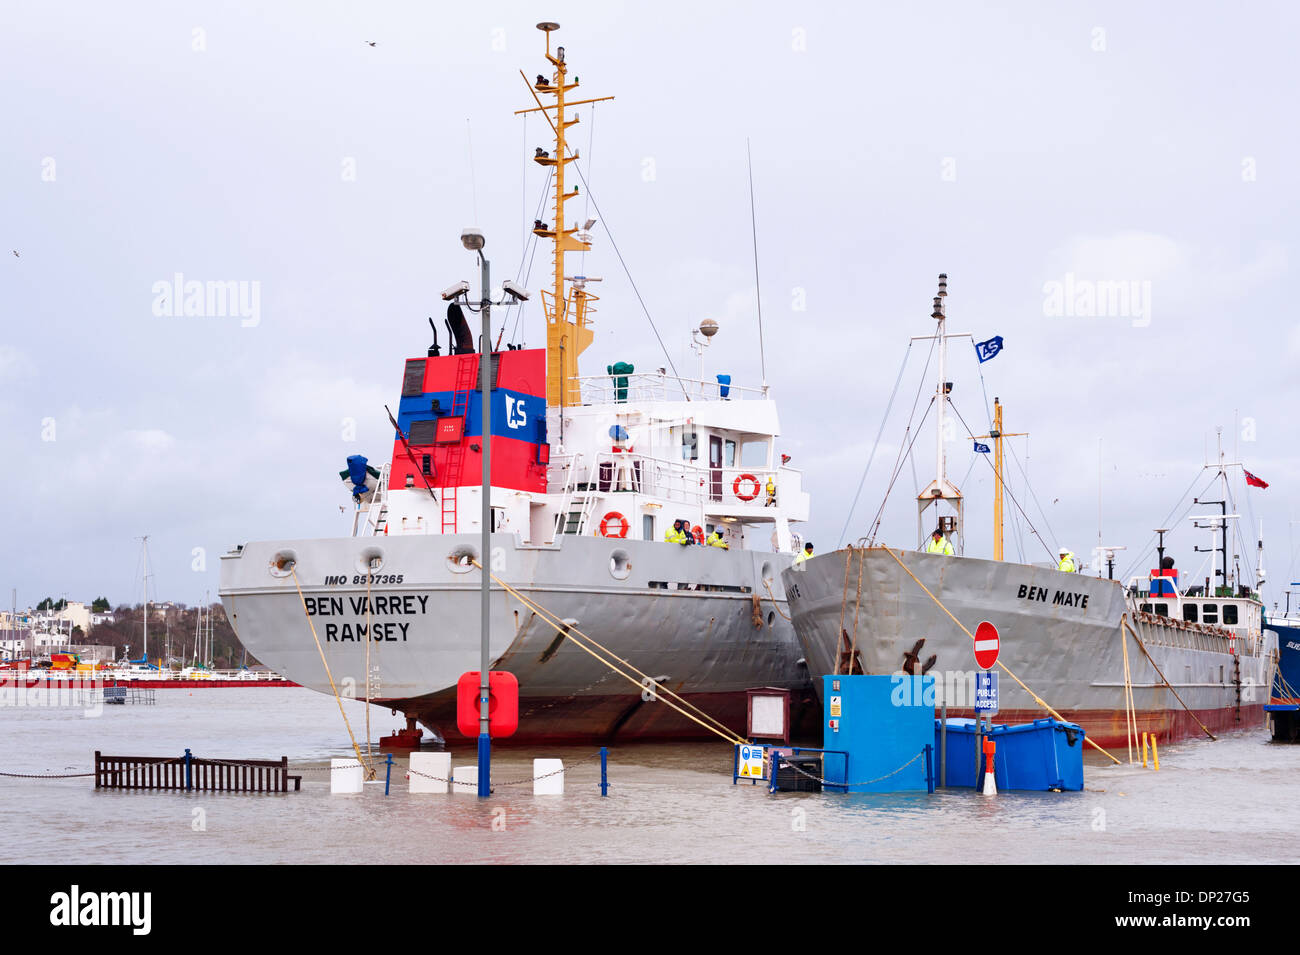 Ramsey, Isle of Man (British Isles) - cargo ships tied up in a flooded harbour during an exceptionally high tide Stock Photo